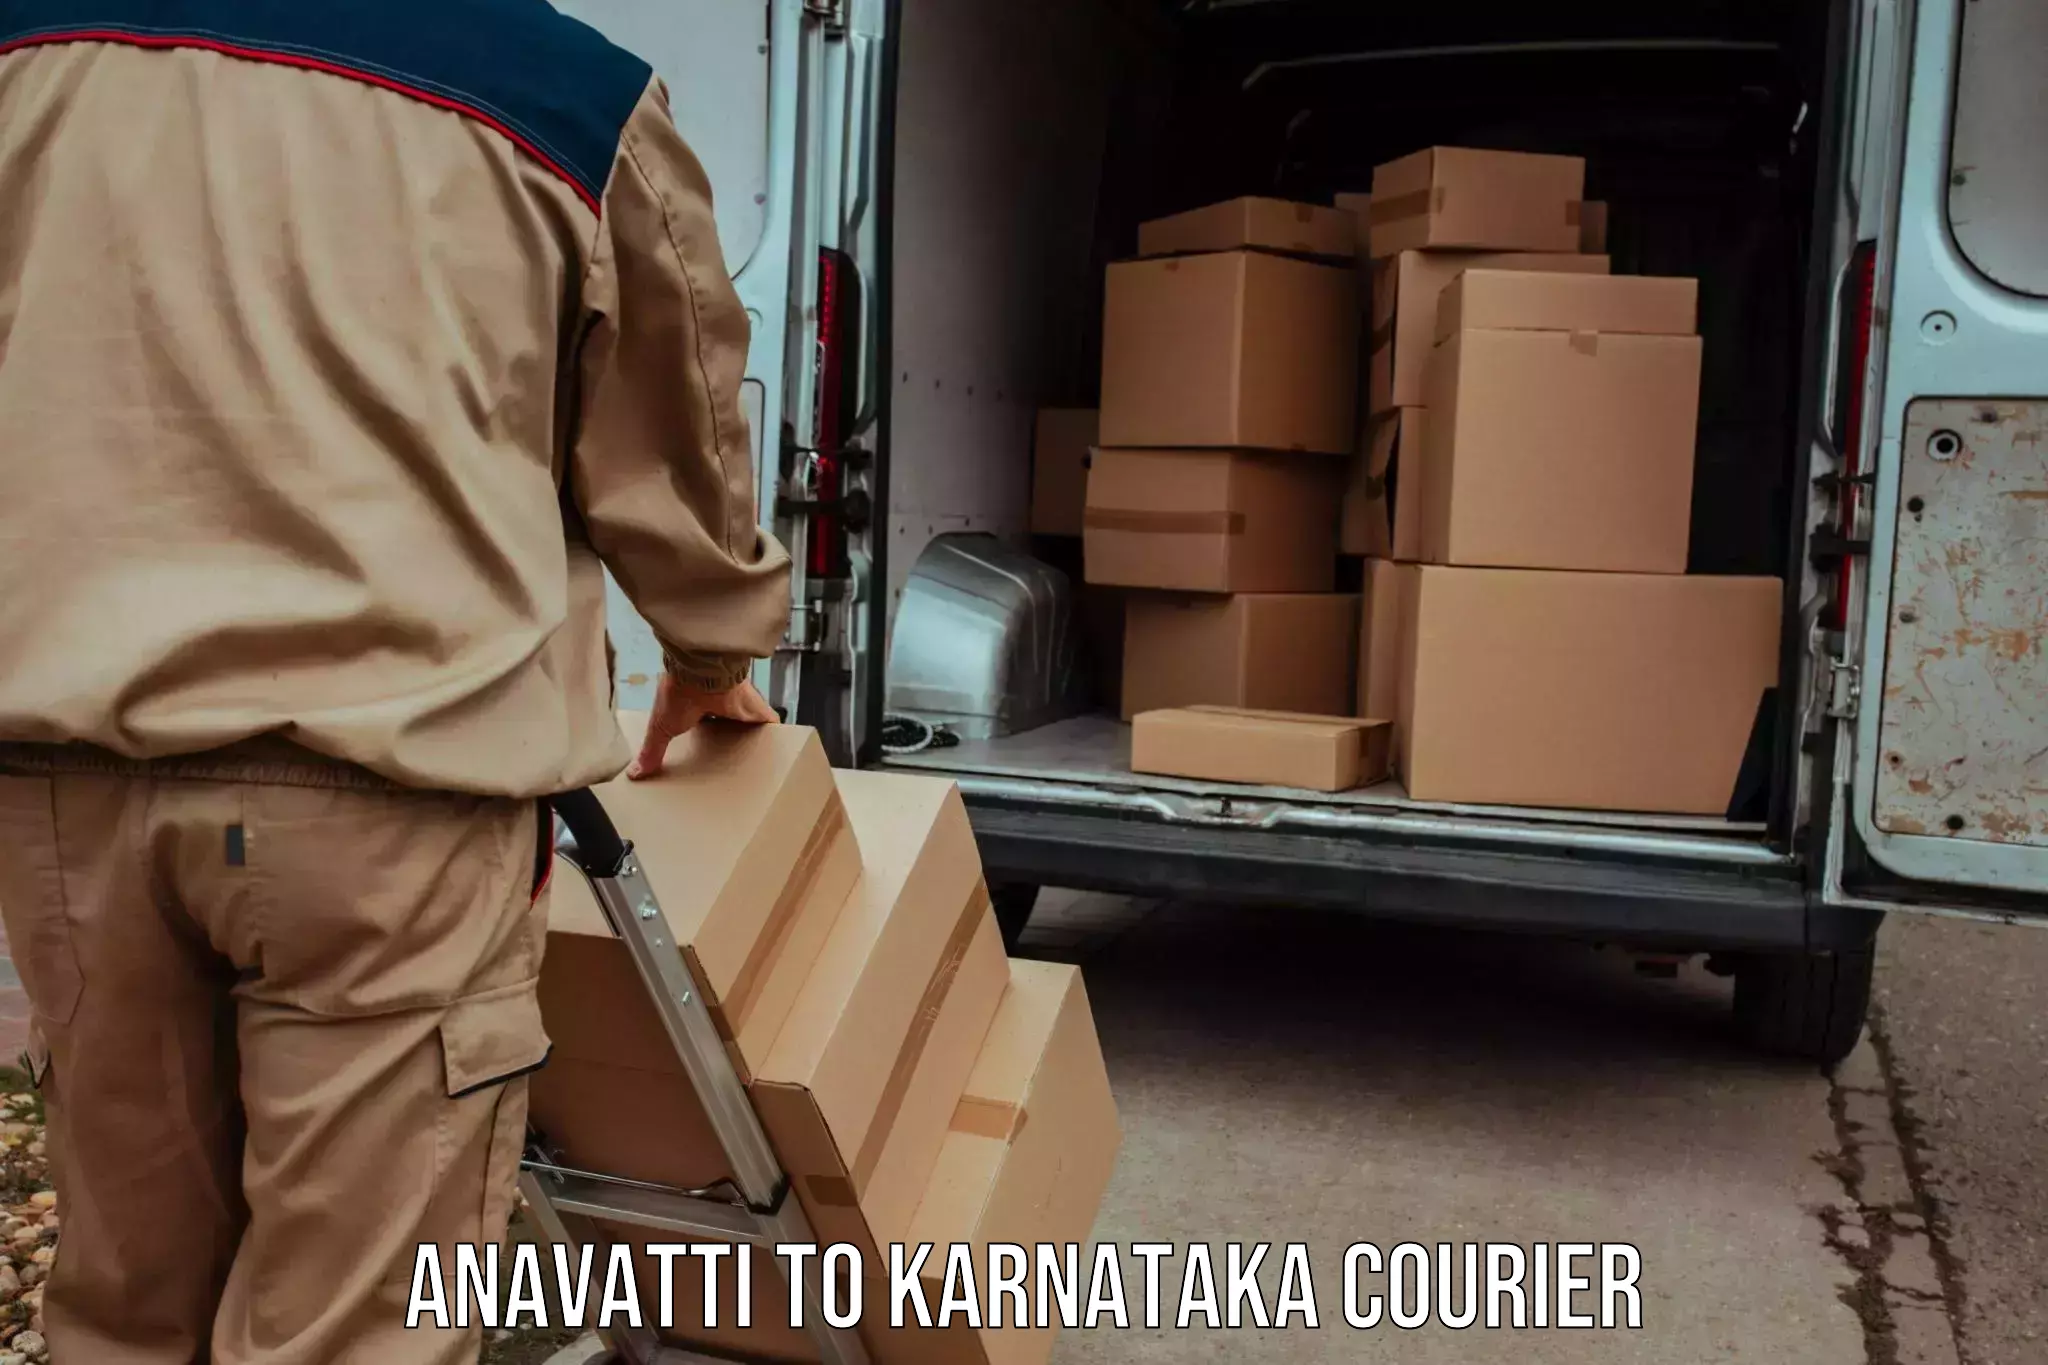 Doorstep delivery service Anavatti to Kollegal